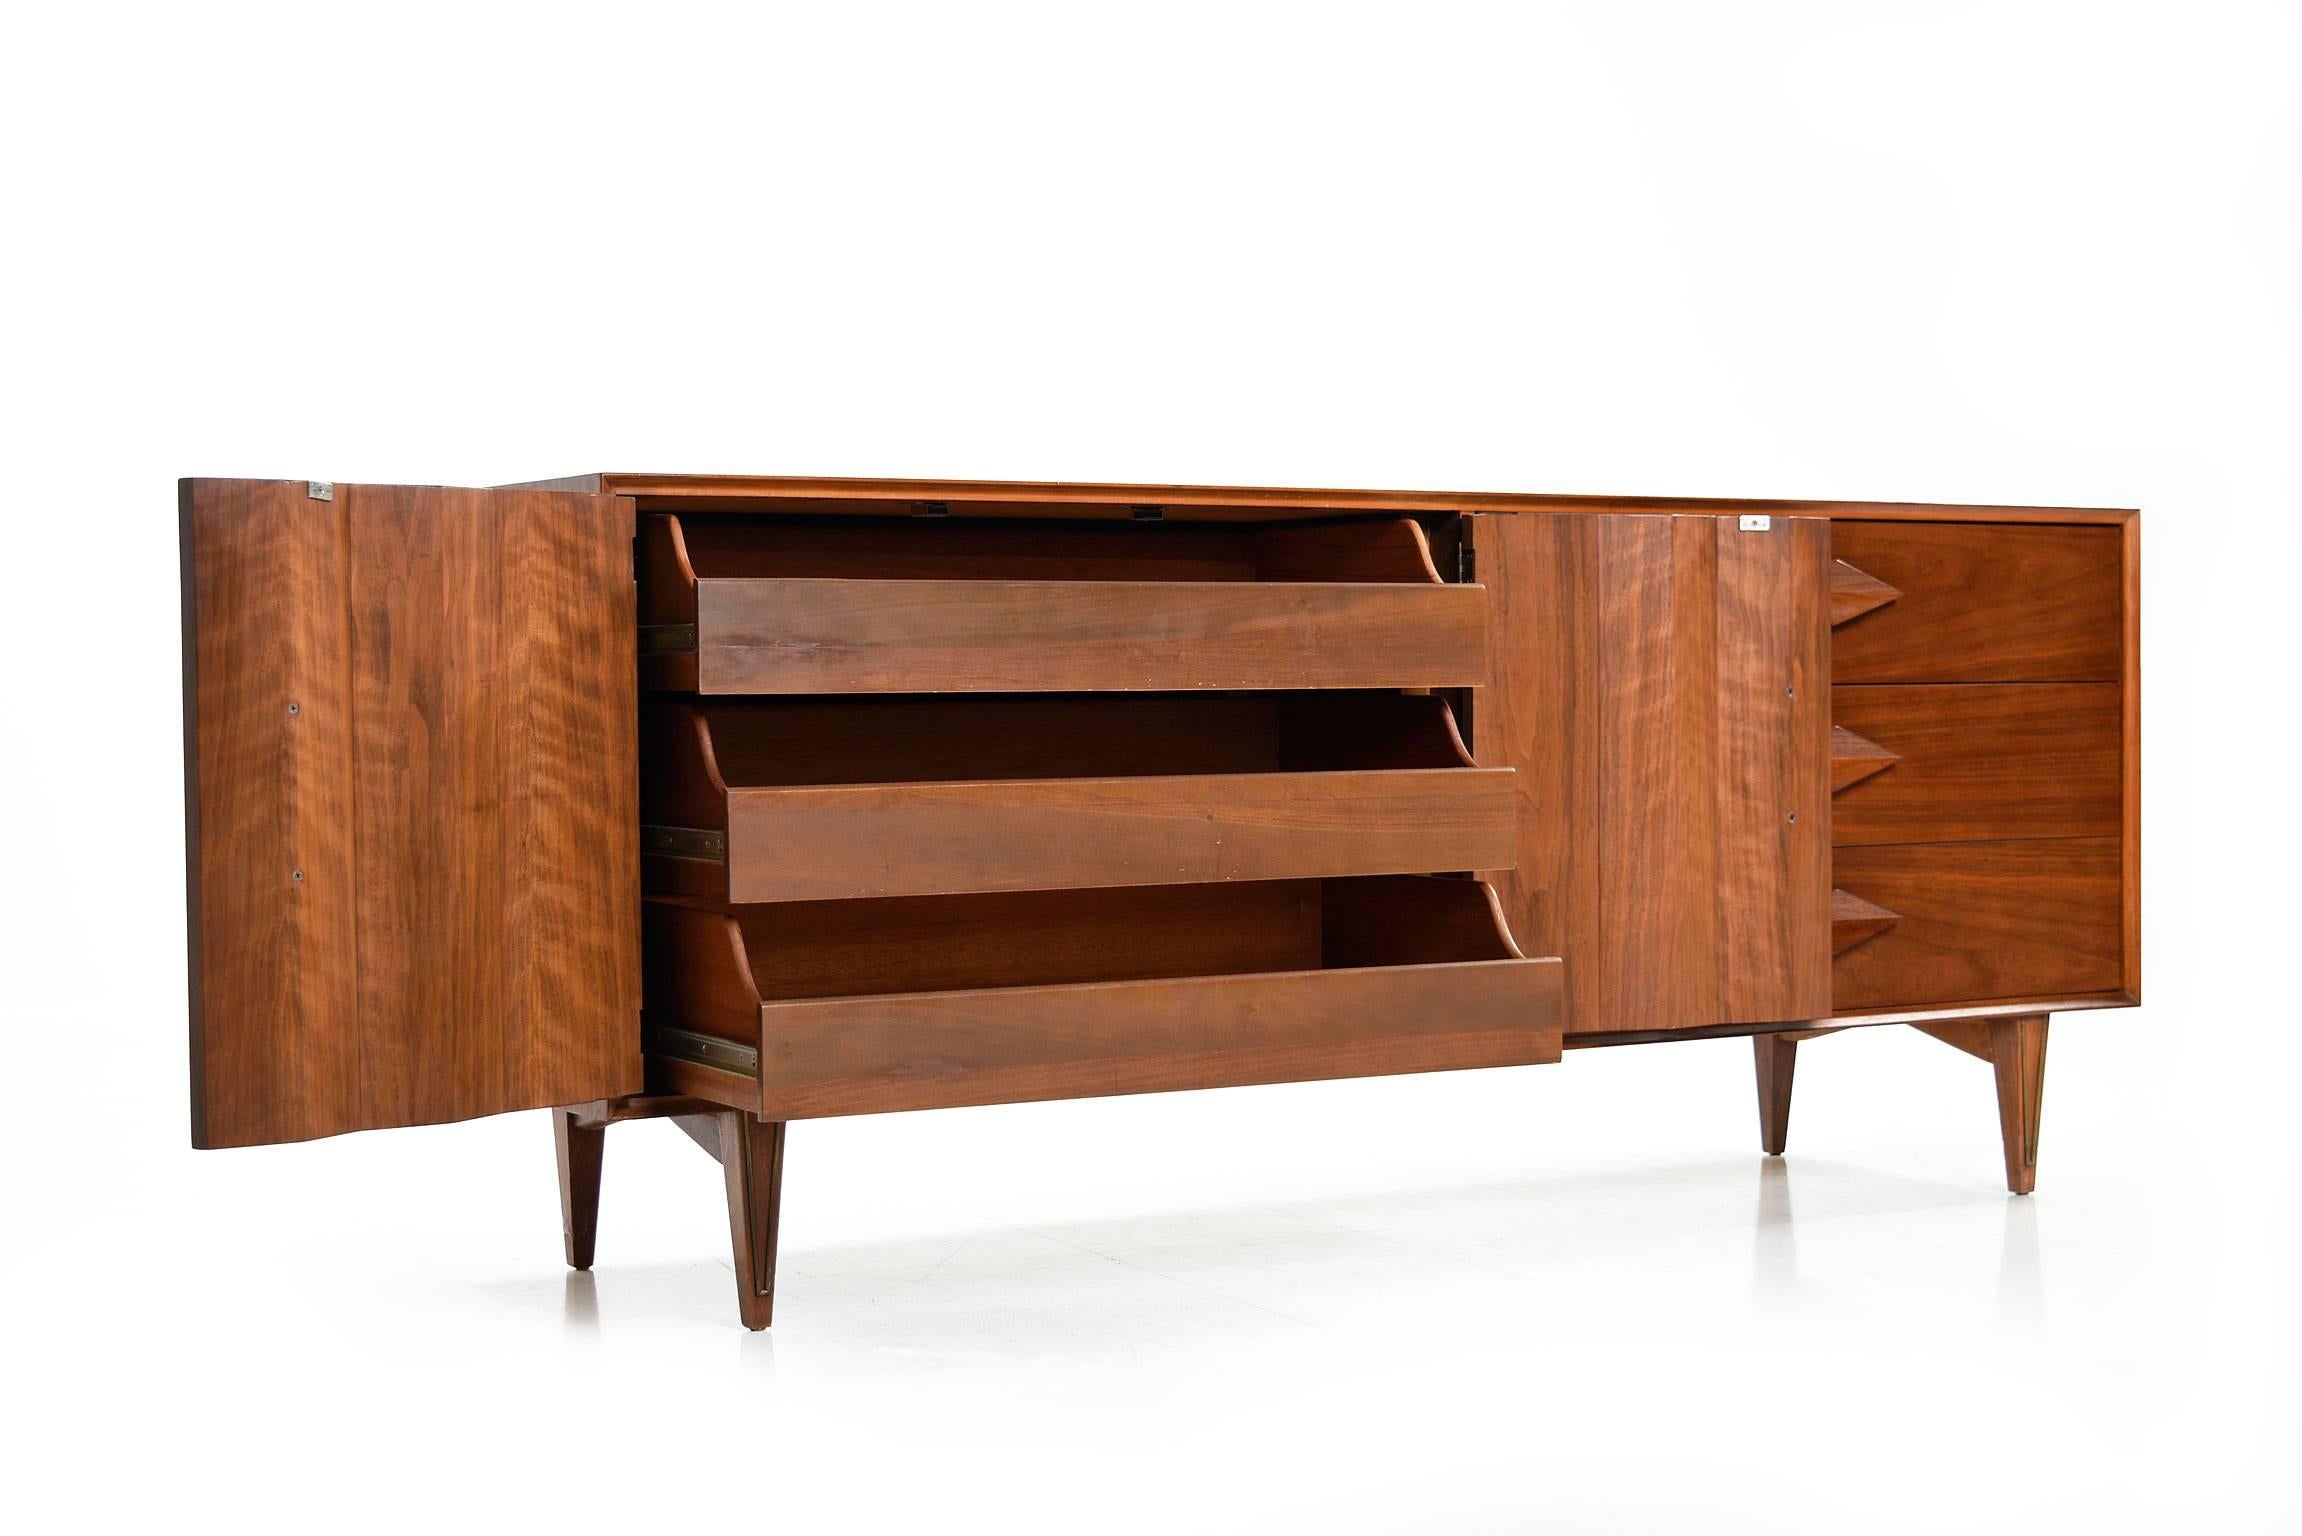 Mid-Century Modern walnut double dresser, made in America in the 1950s. This stunning double dresser features walnut sculpted diamond shaped drawer pulls and brass detailing along the front of the legs. This well designed and beautifully crafted